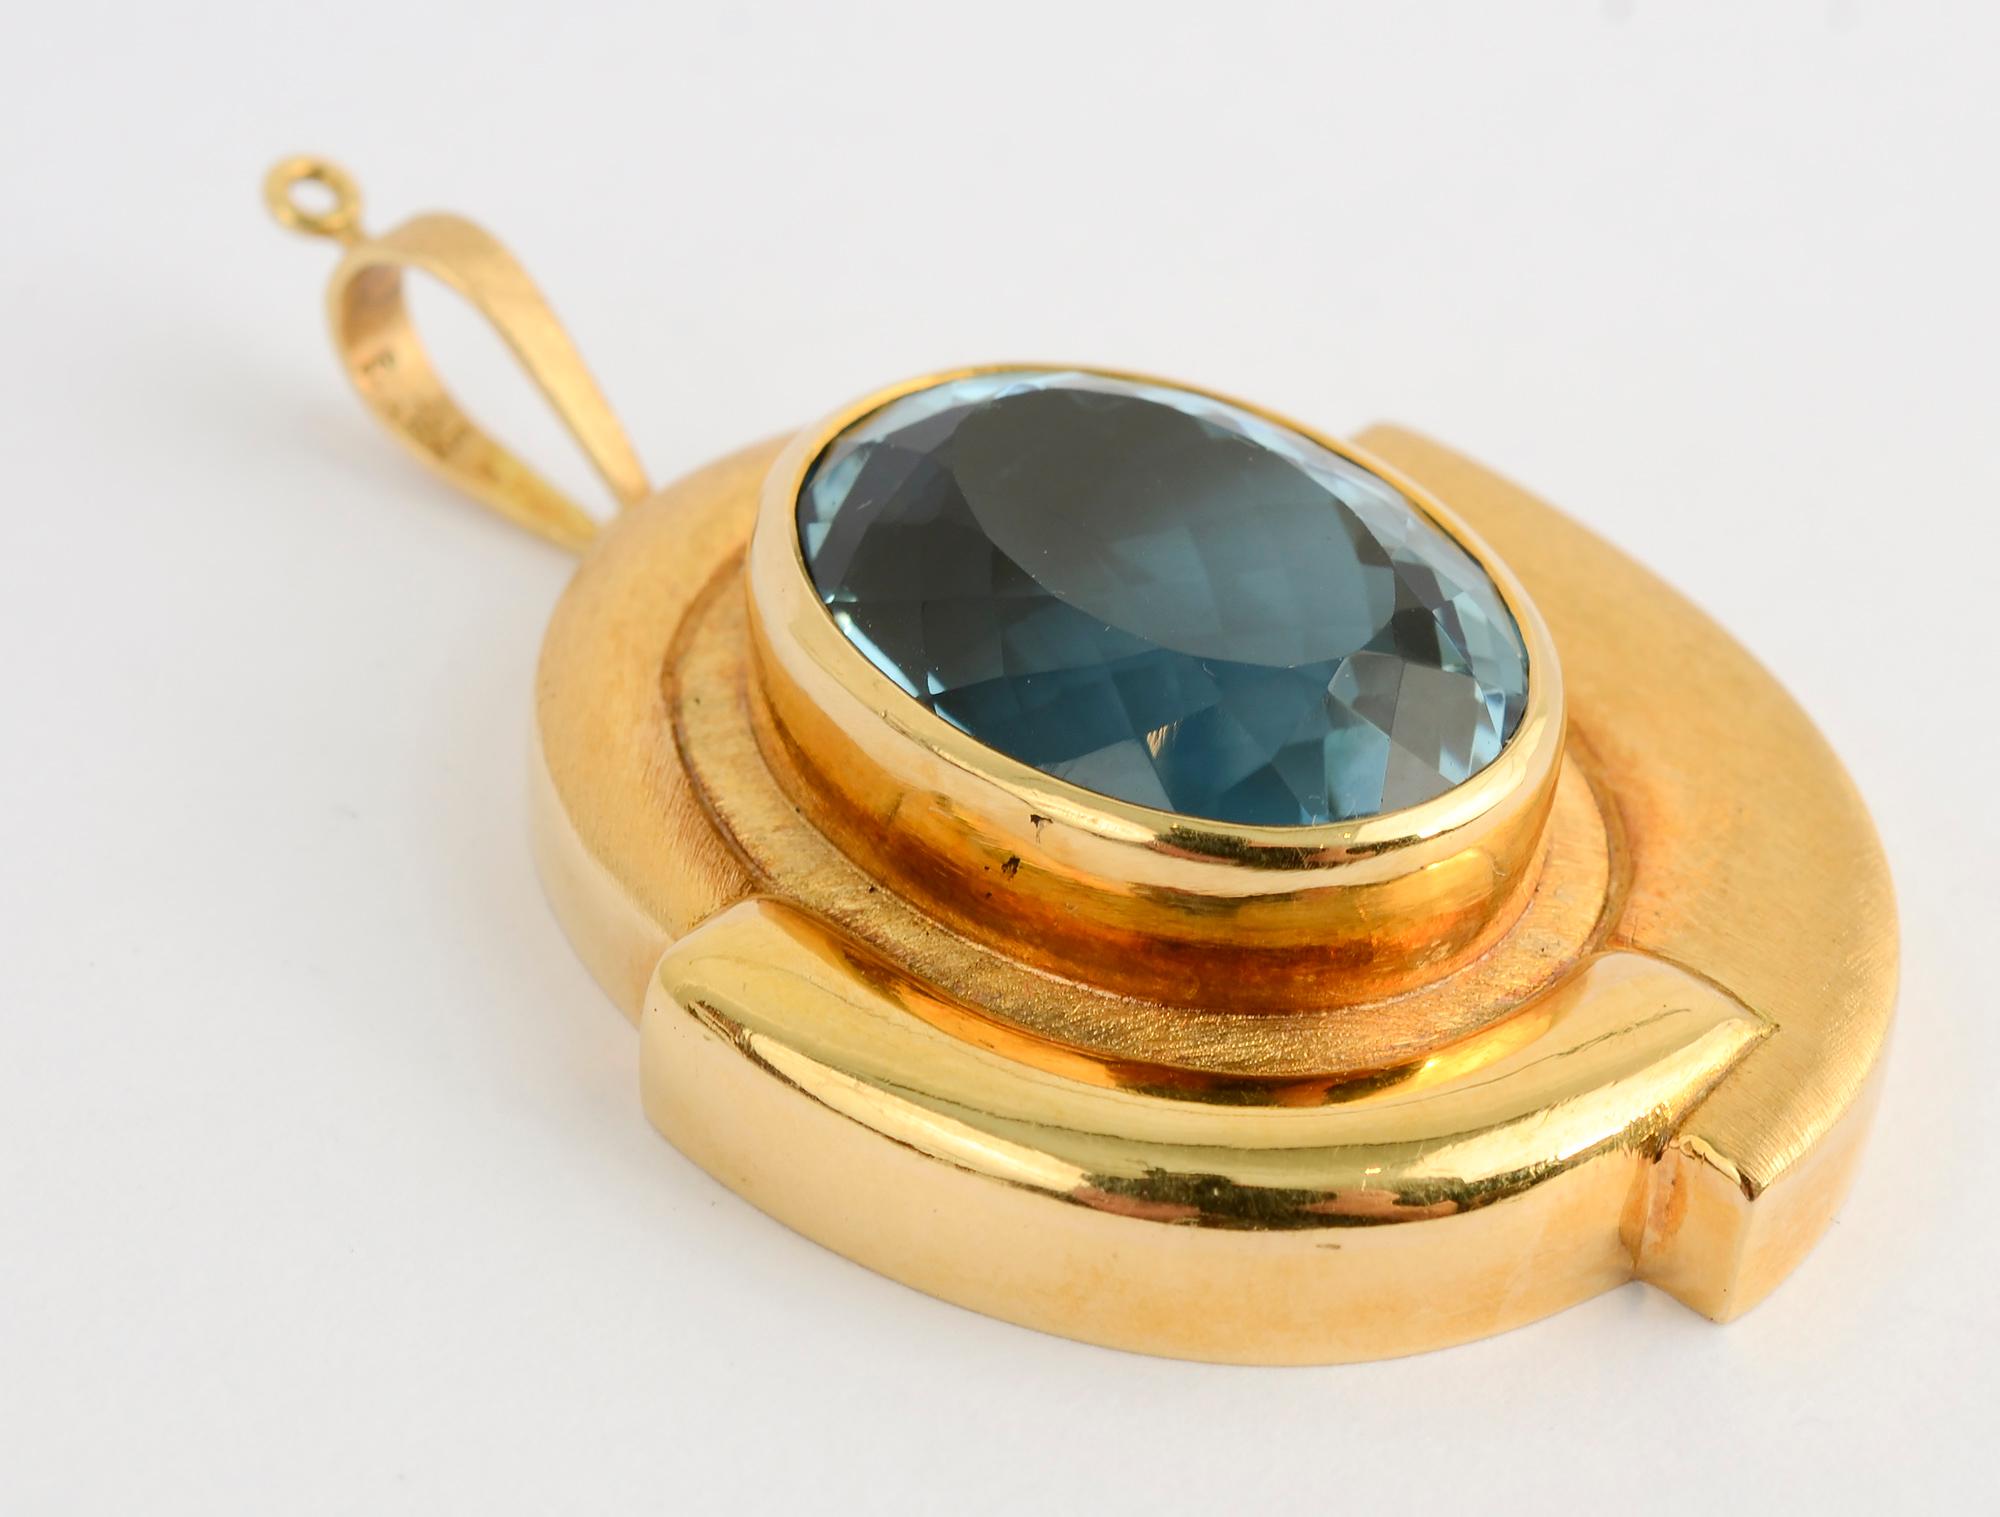 Beautiful and bold blue topaz pendant by Brazilian designer, Haroldo Burle Marx.
The faceted stone measures 7/8